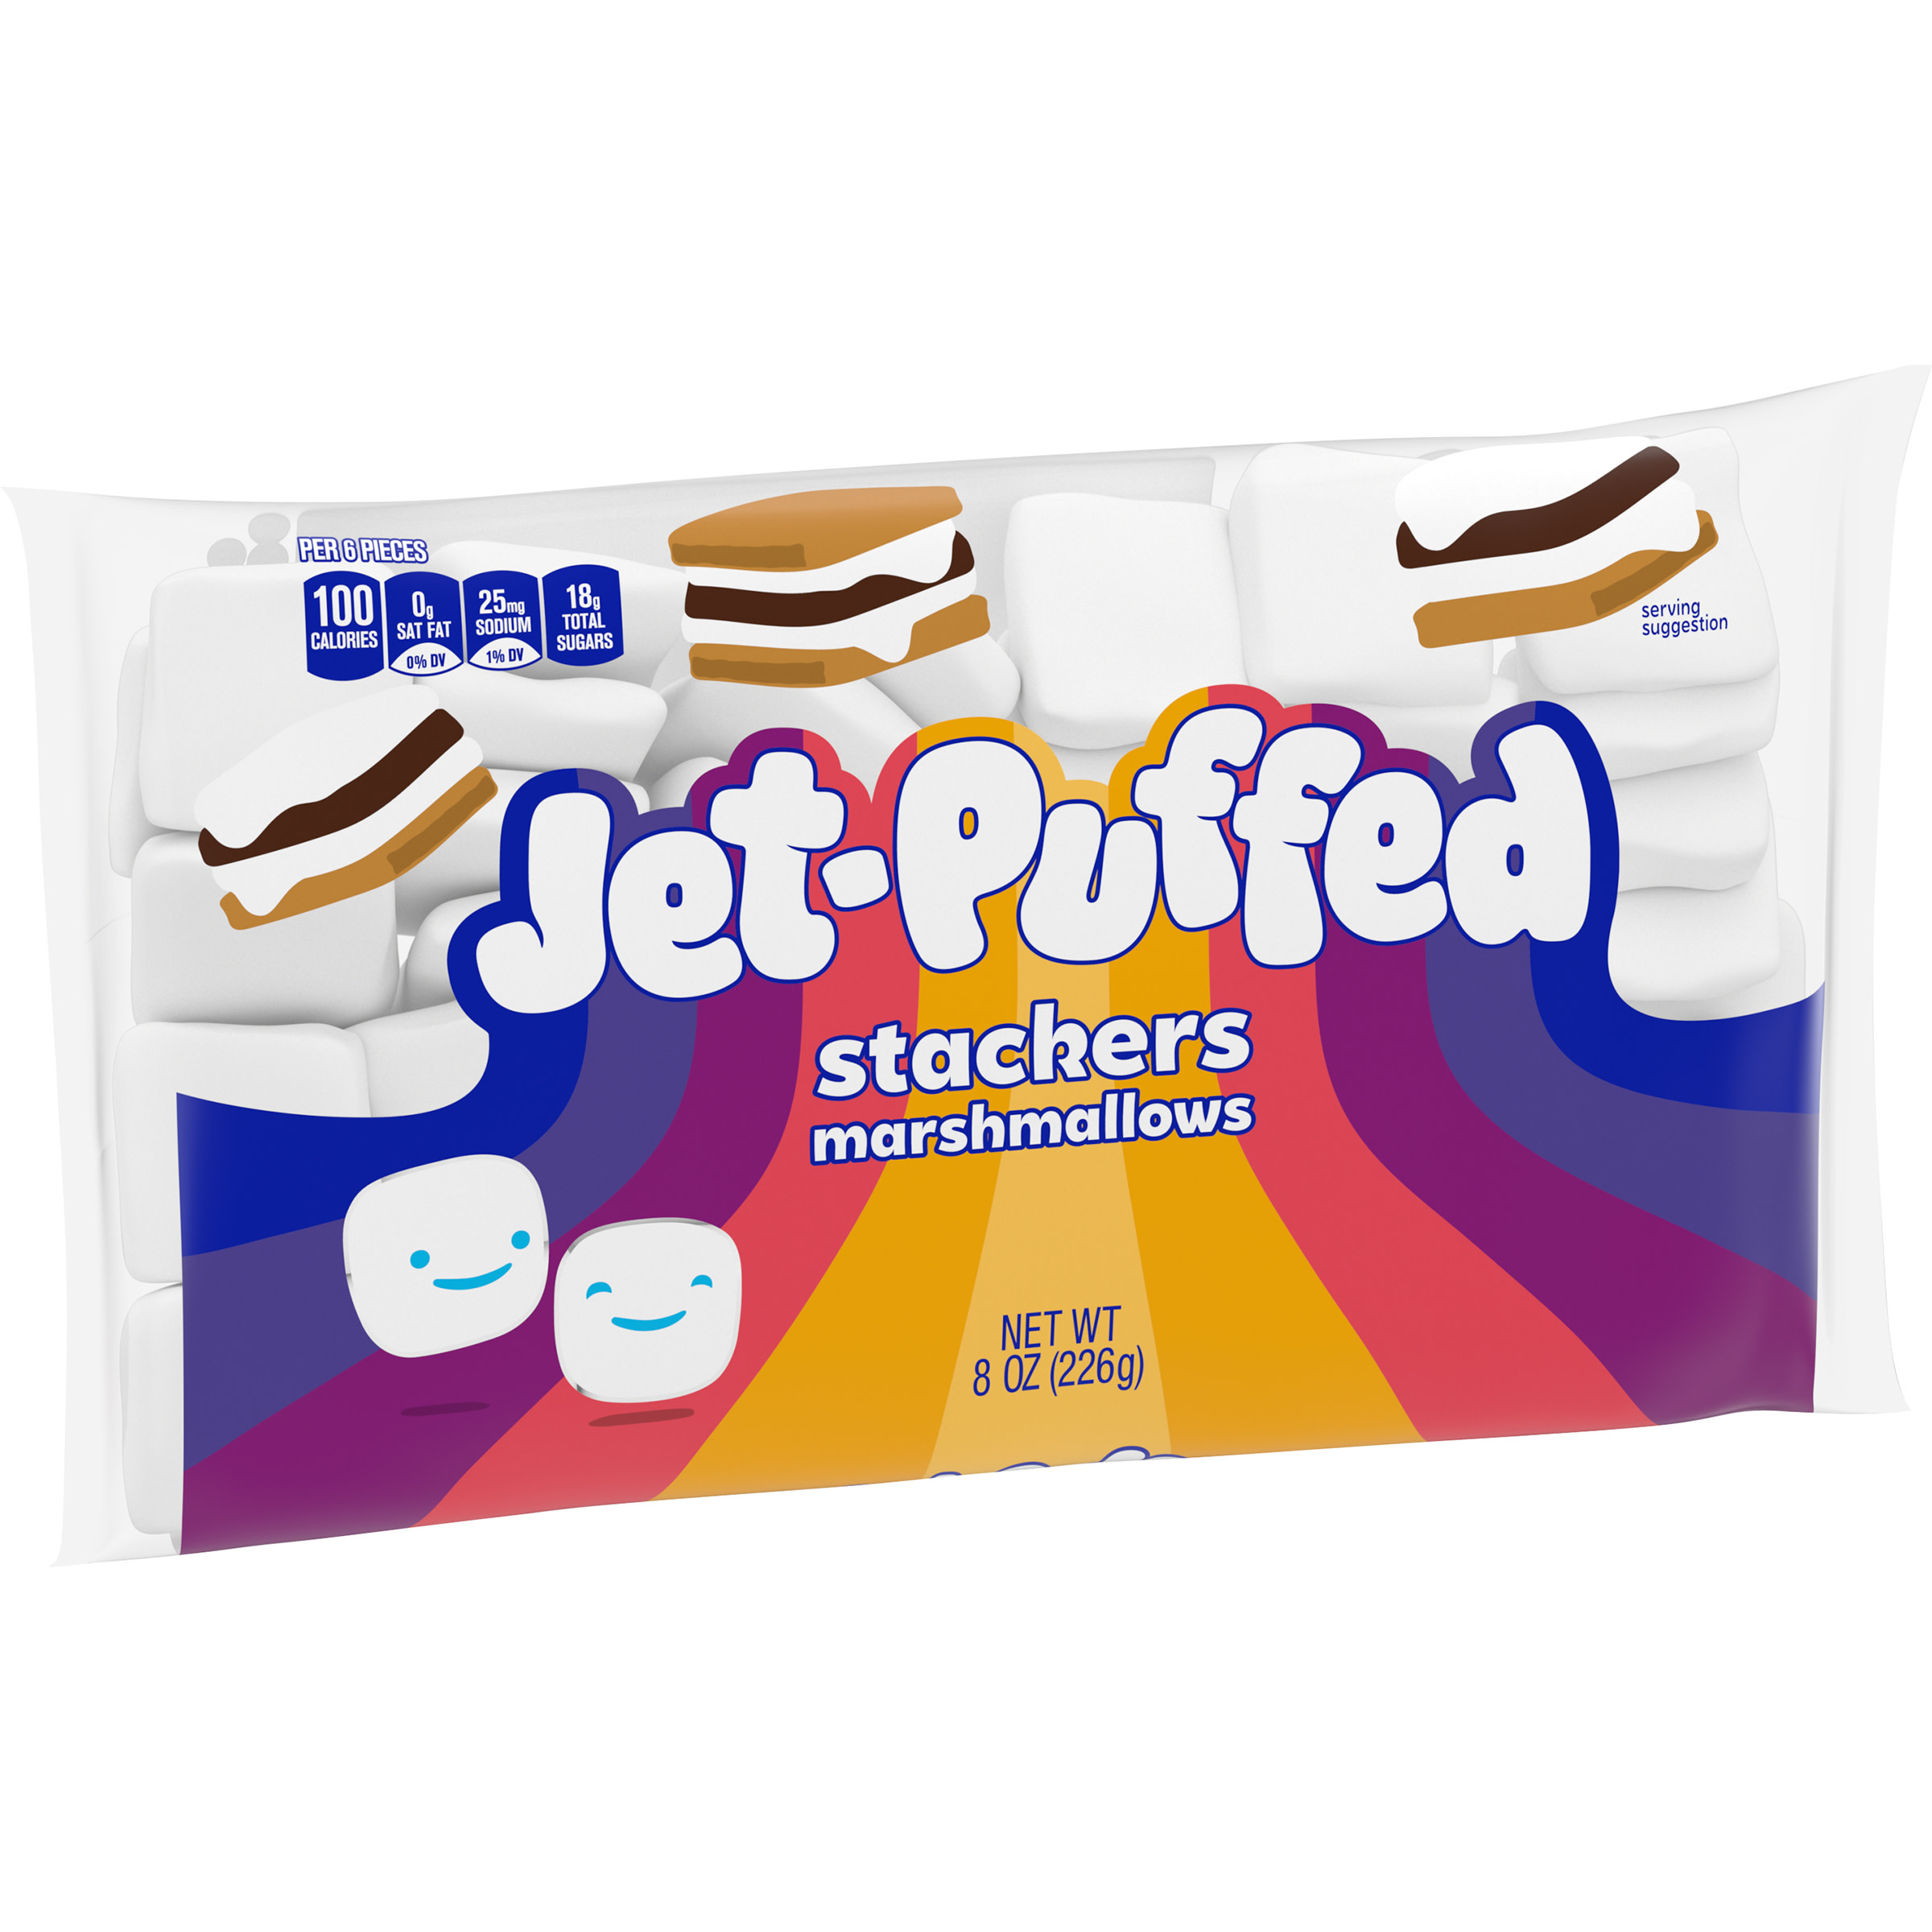 Jet-Puffed Stackers Marshmallows, 8 oz. Bag - image 11 of 16